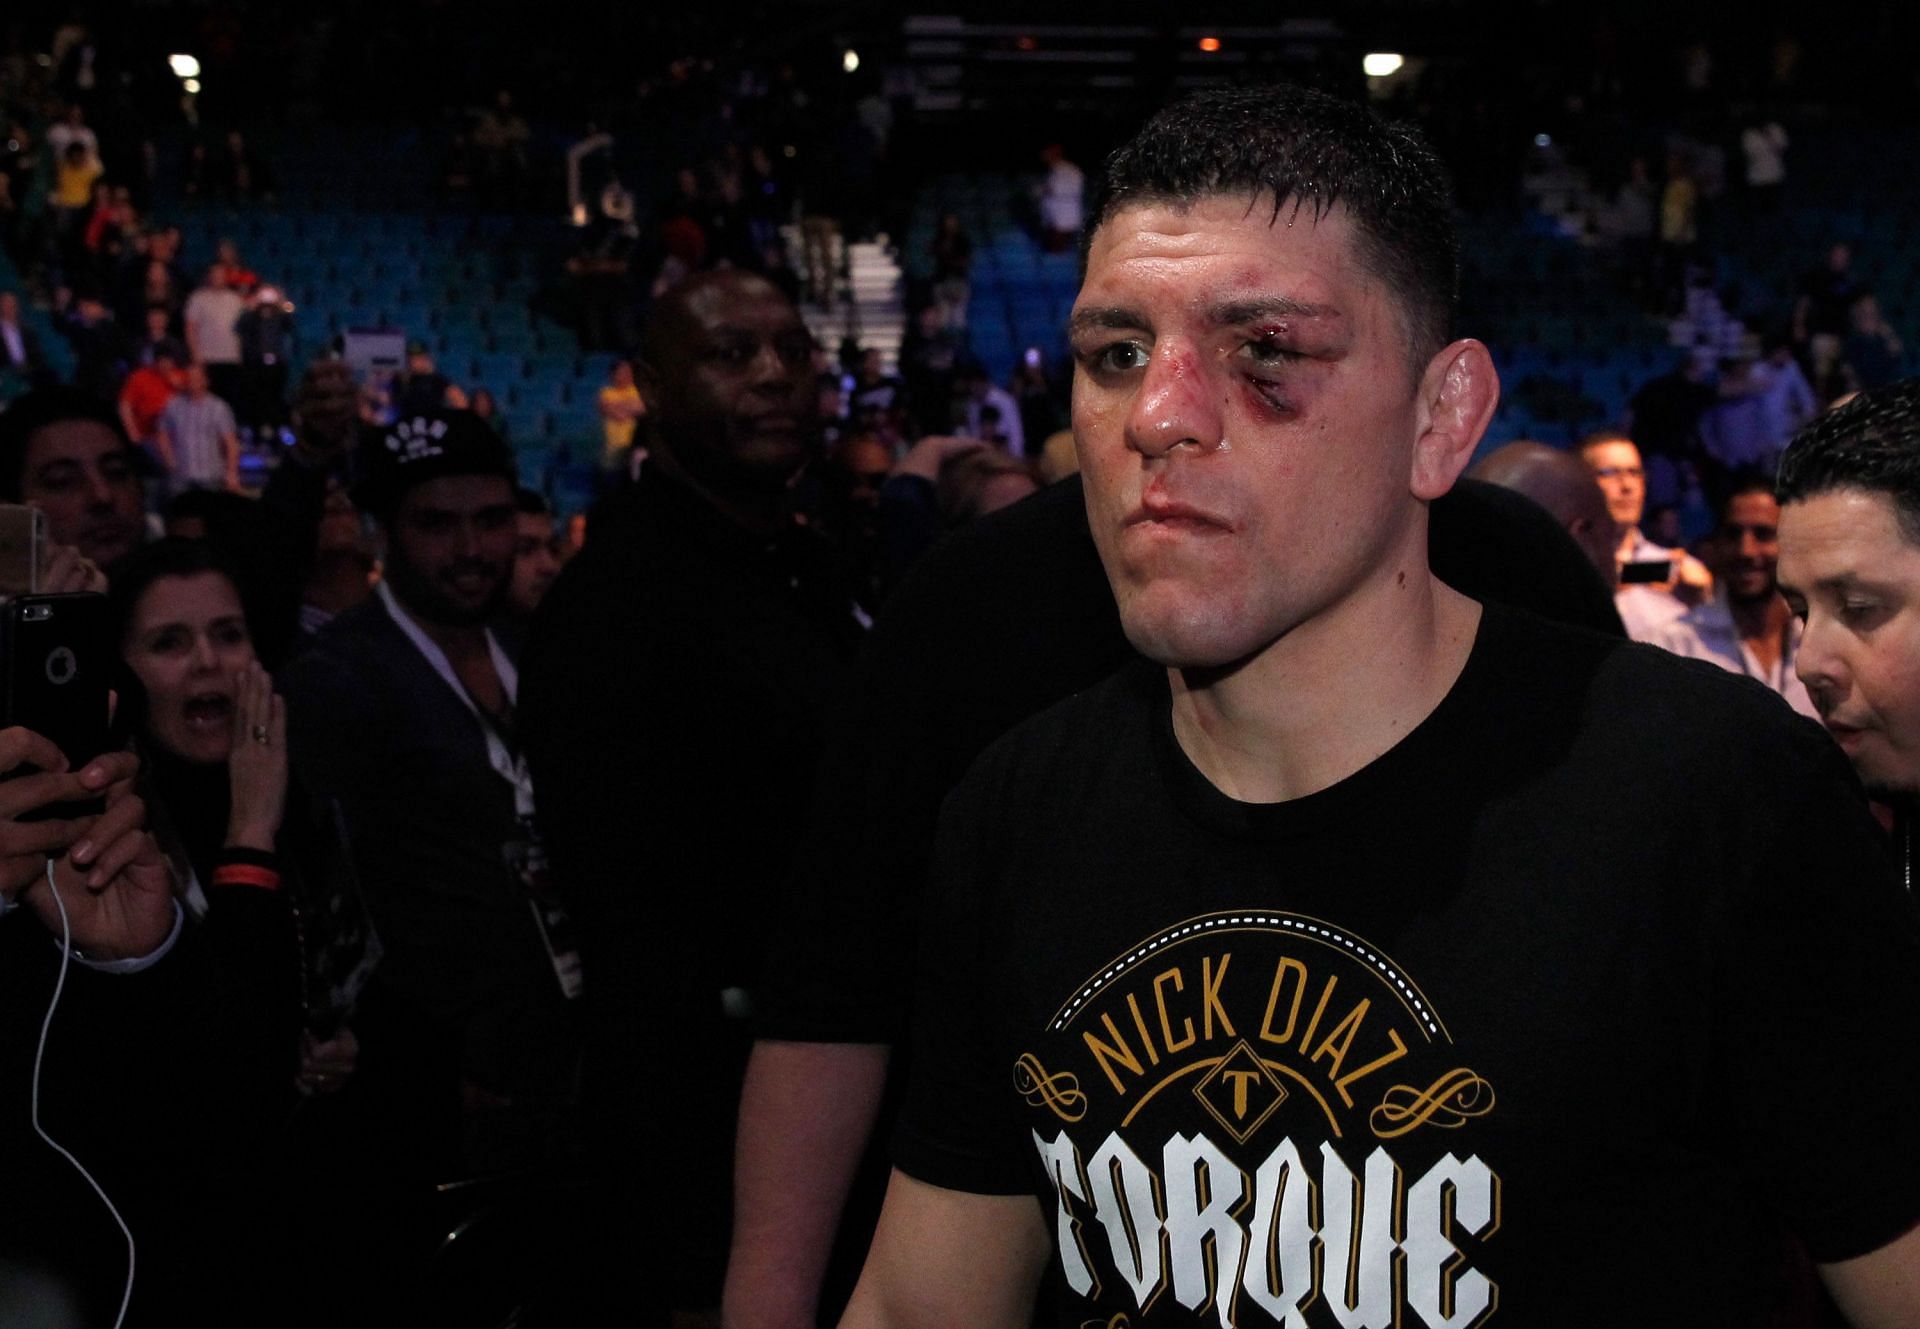 Could Nick Diaz pick up where his brother left off in terms of a rivalry with Conor McGregor?